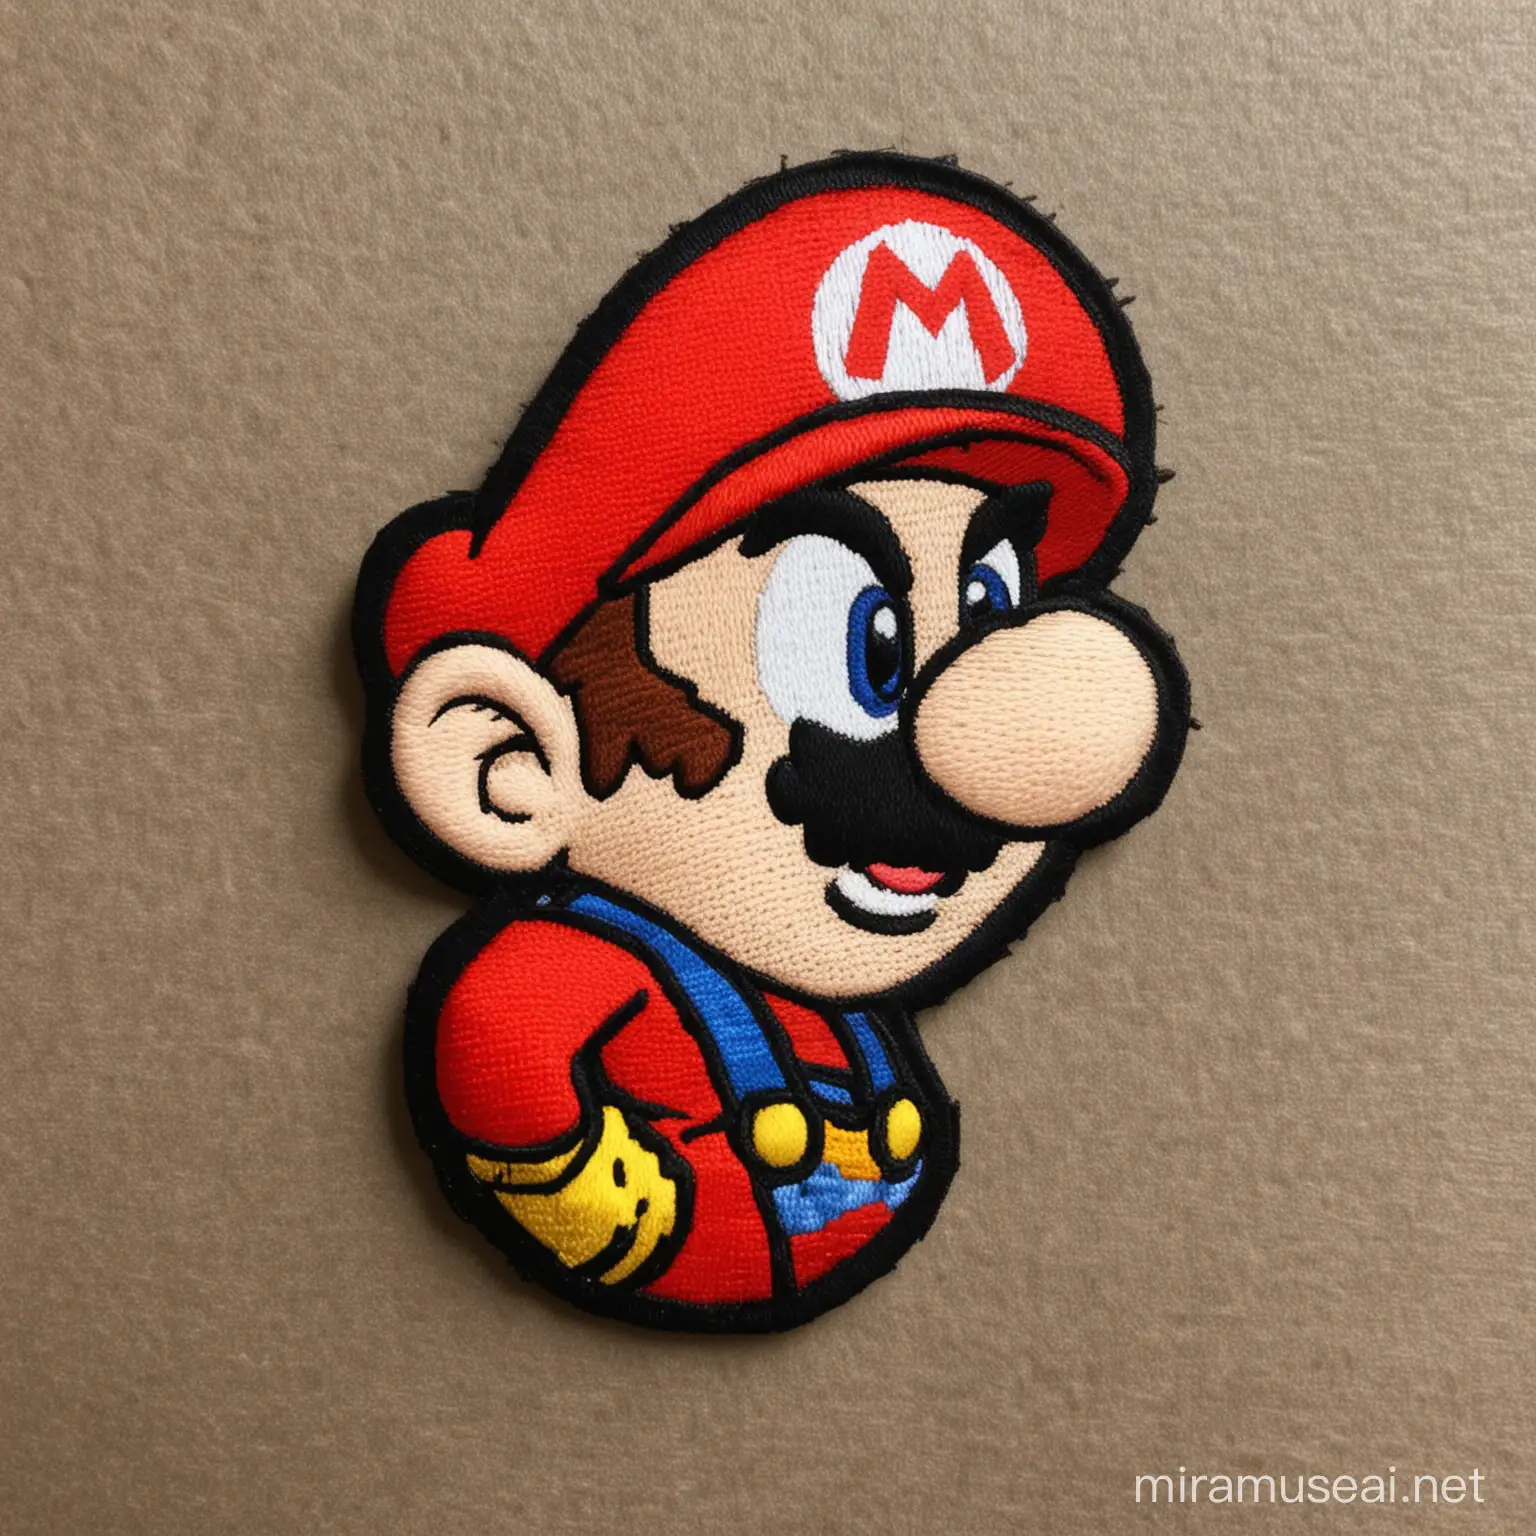 Colorful Super Mario Embroidered Patch Design for Gamers